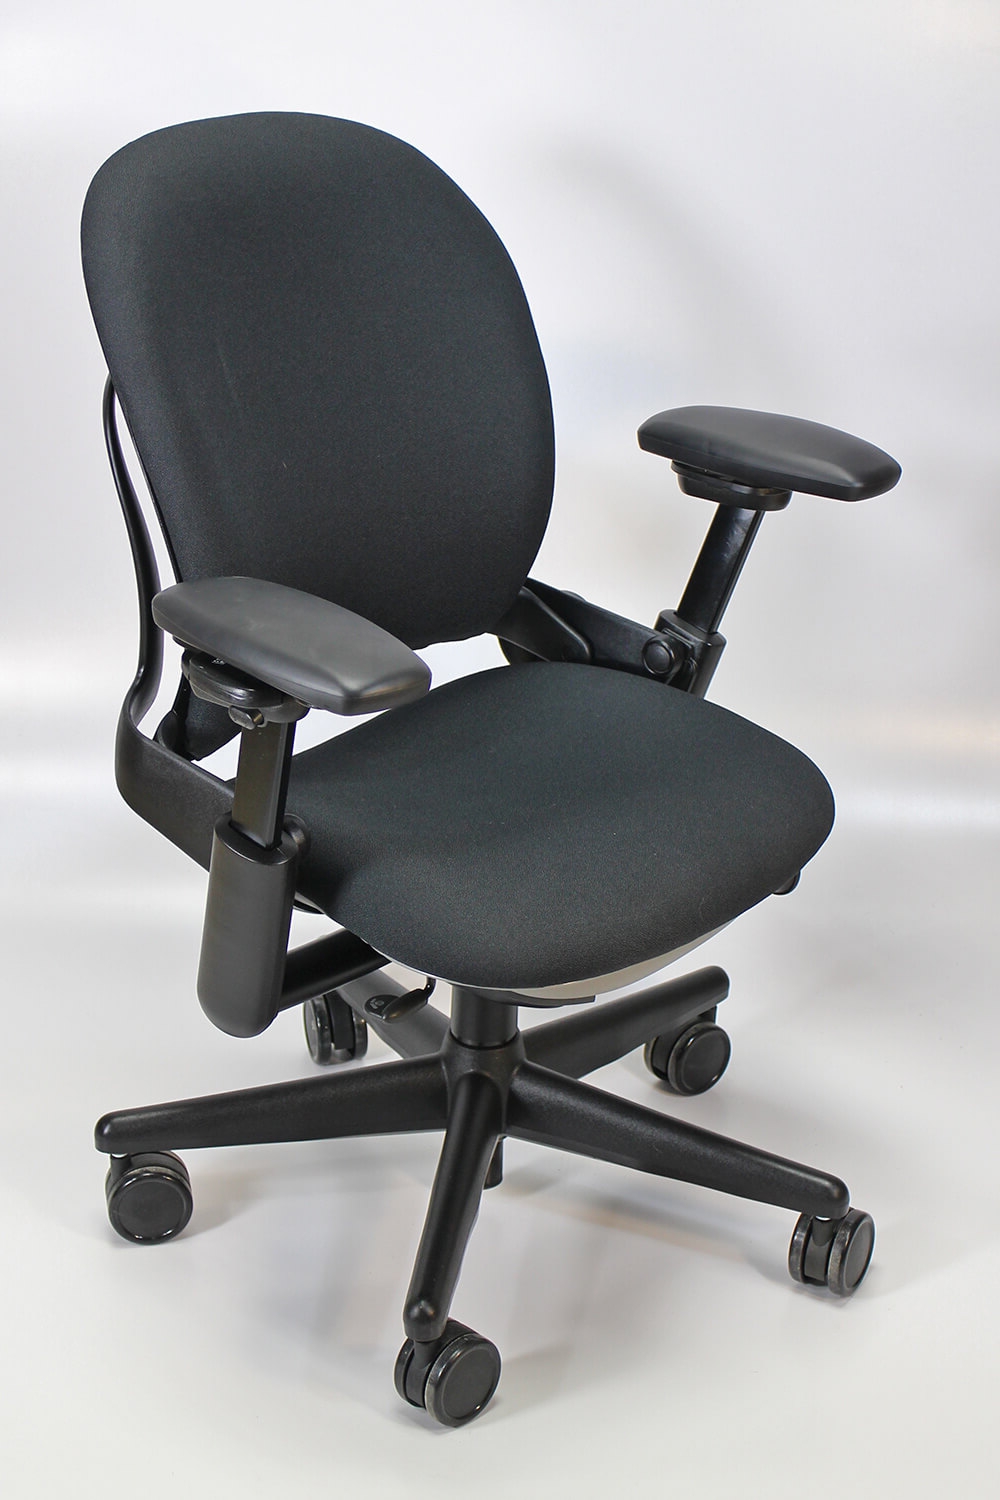 steelcase-chairs-steelcase-leap-v1.jpg